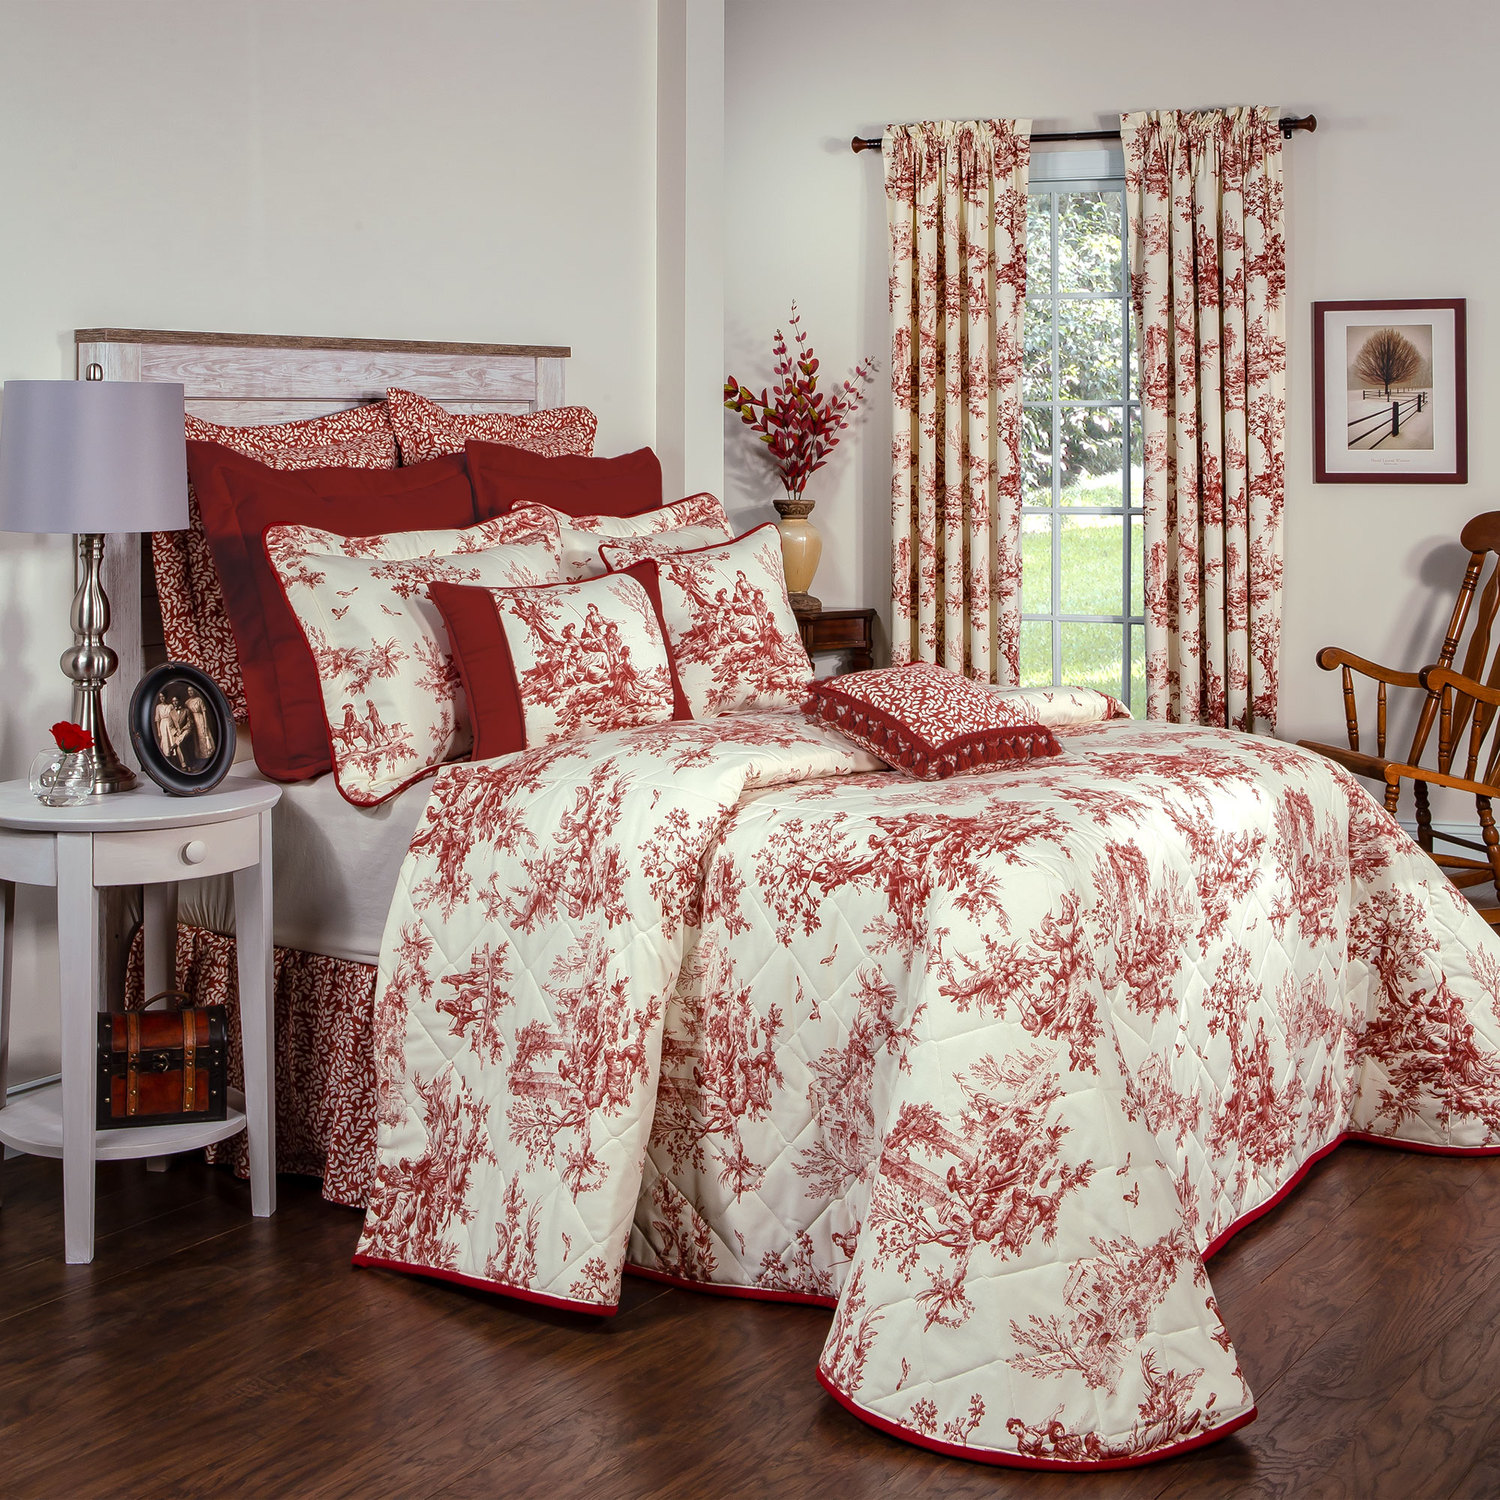 Bouvier Red by Thomasville Home - BeddingSuperStore.com